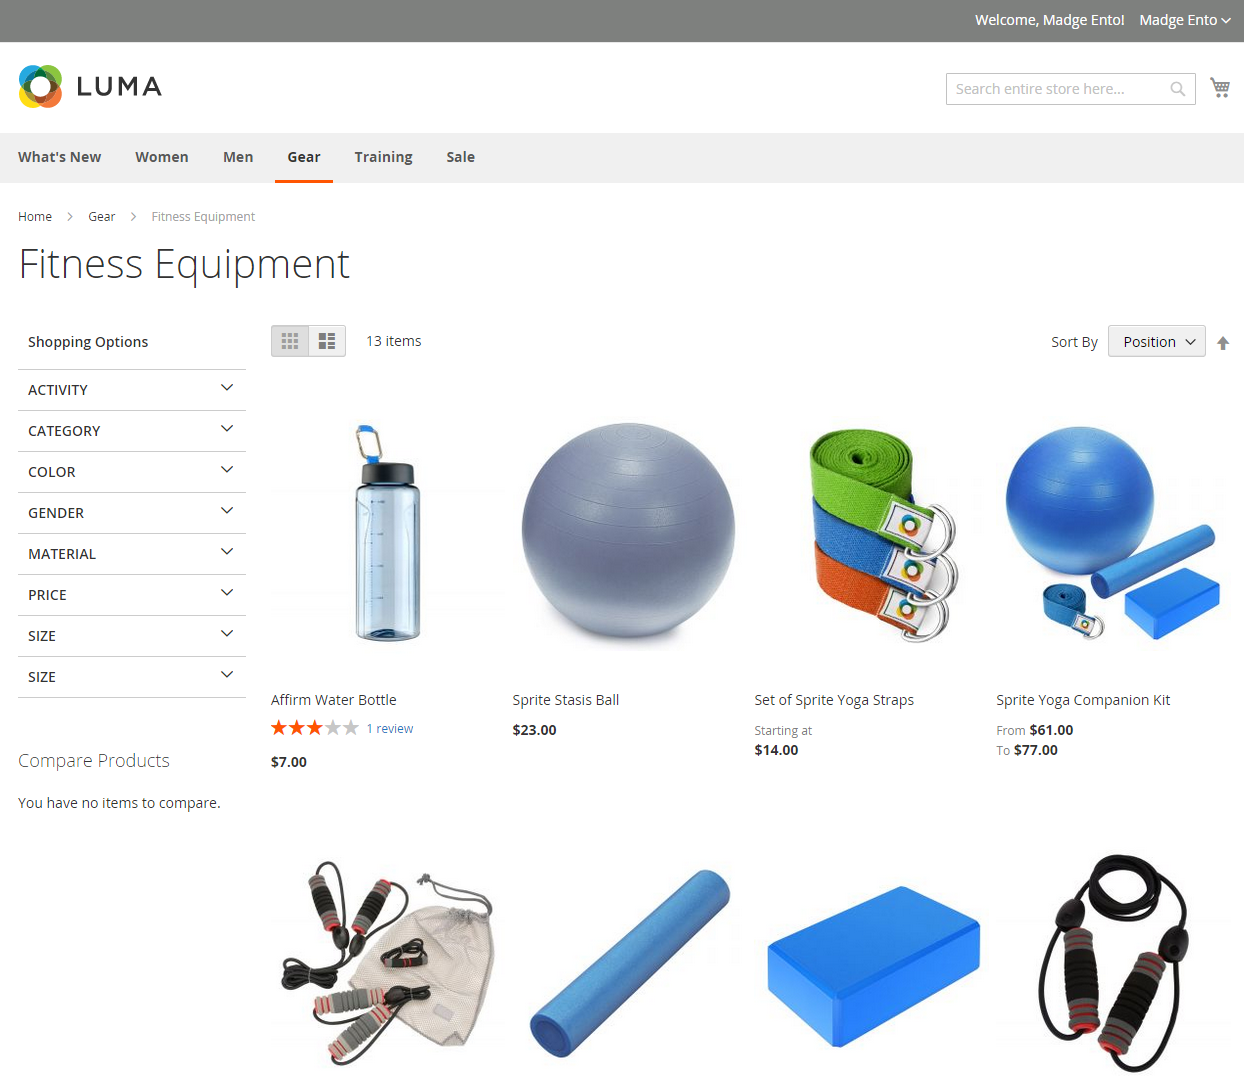 Magento 2 Product Listing